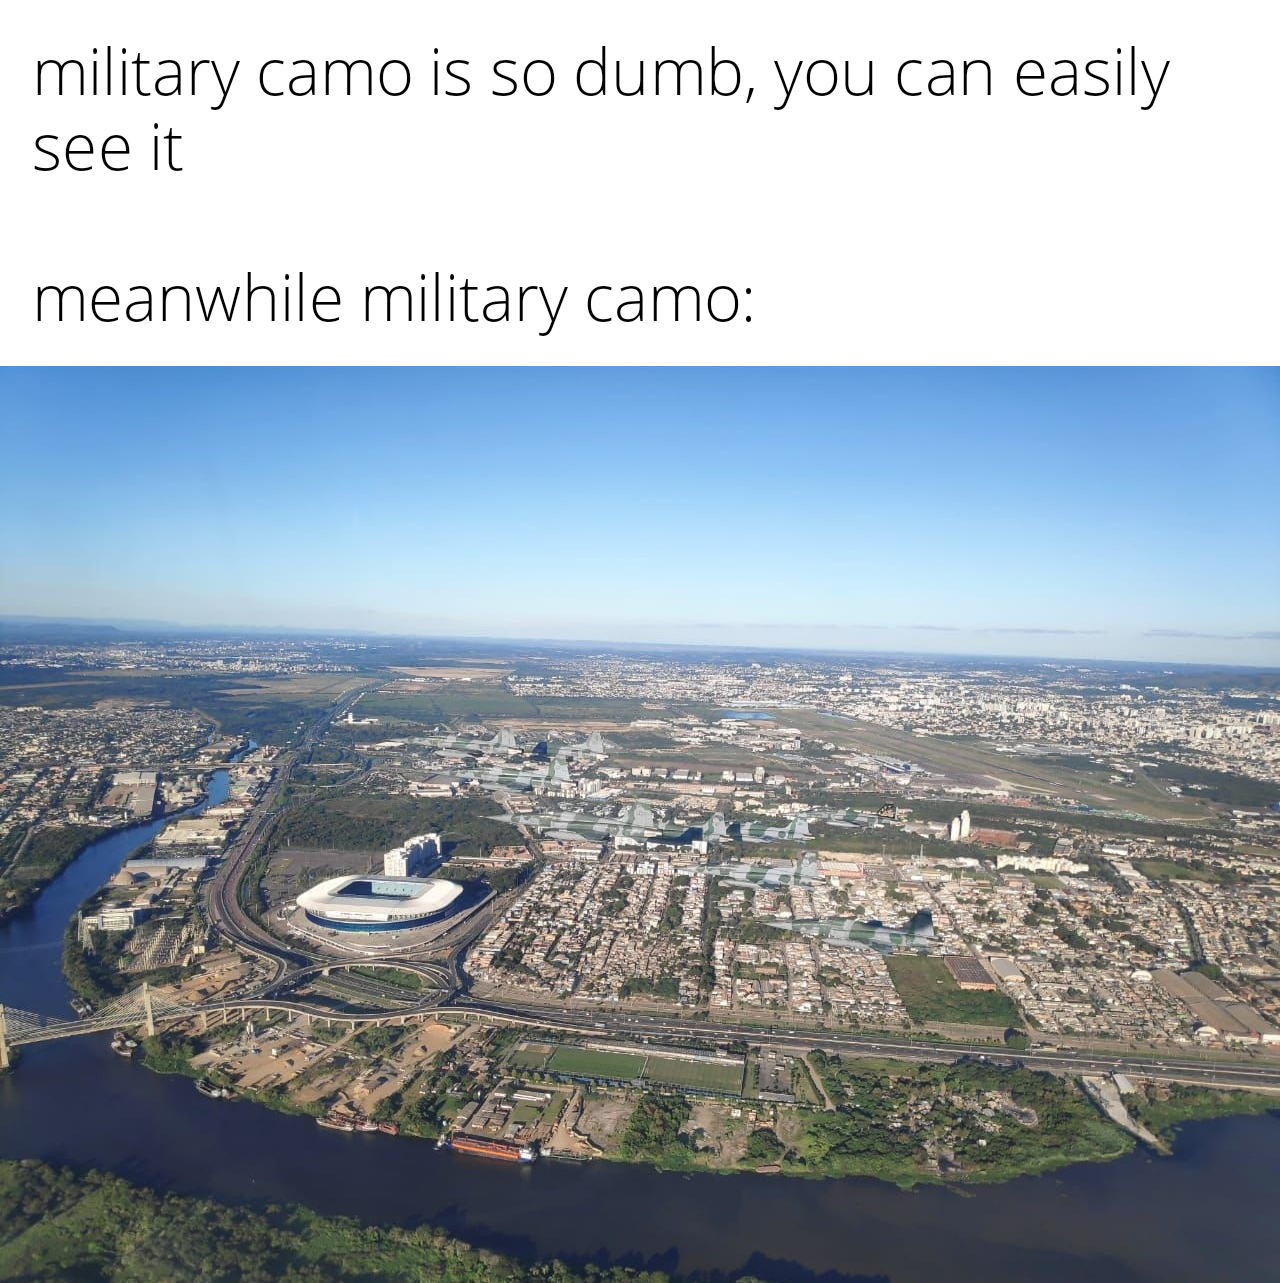 Monday Morning Randomness - military camo is so dumb, you can easily see it meanwhile military camo